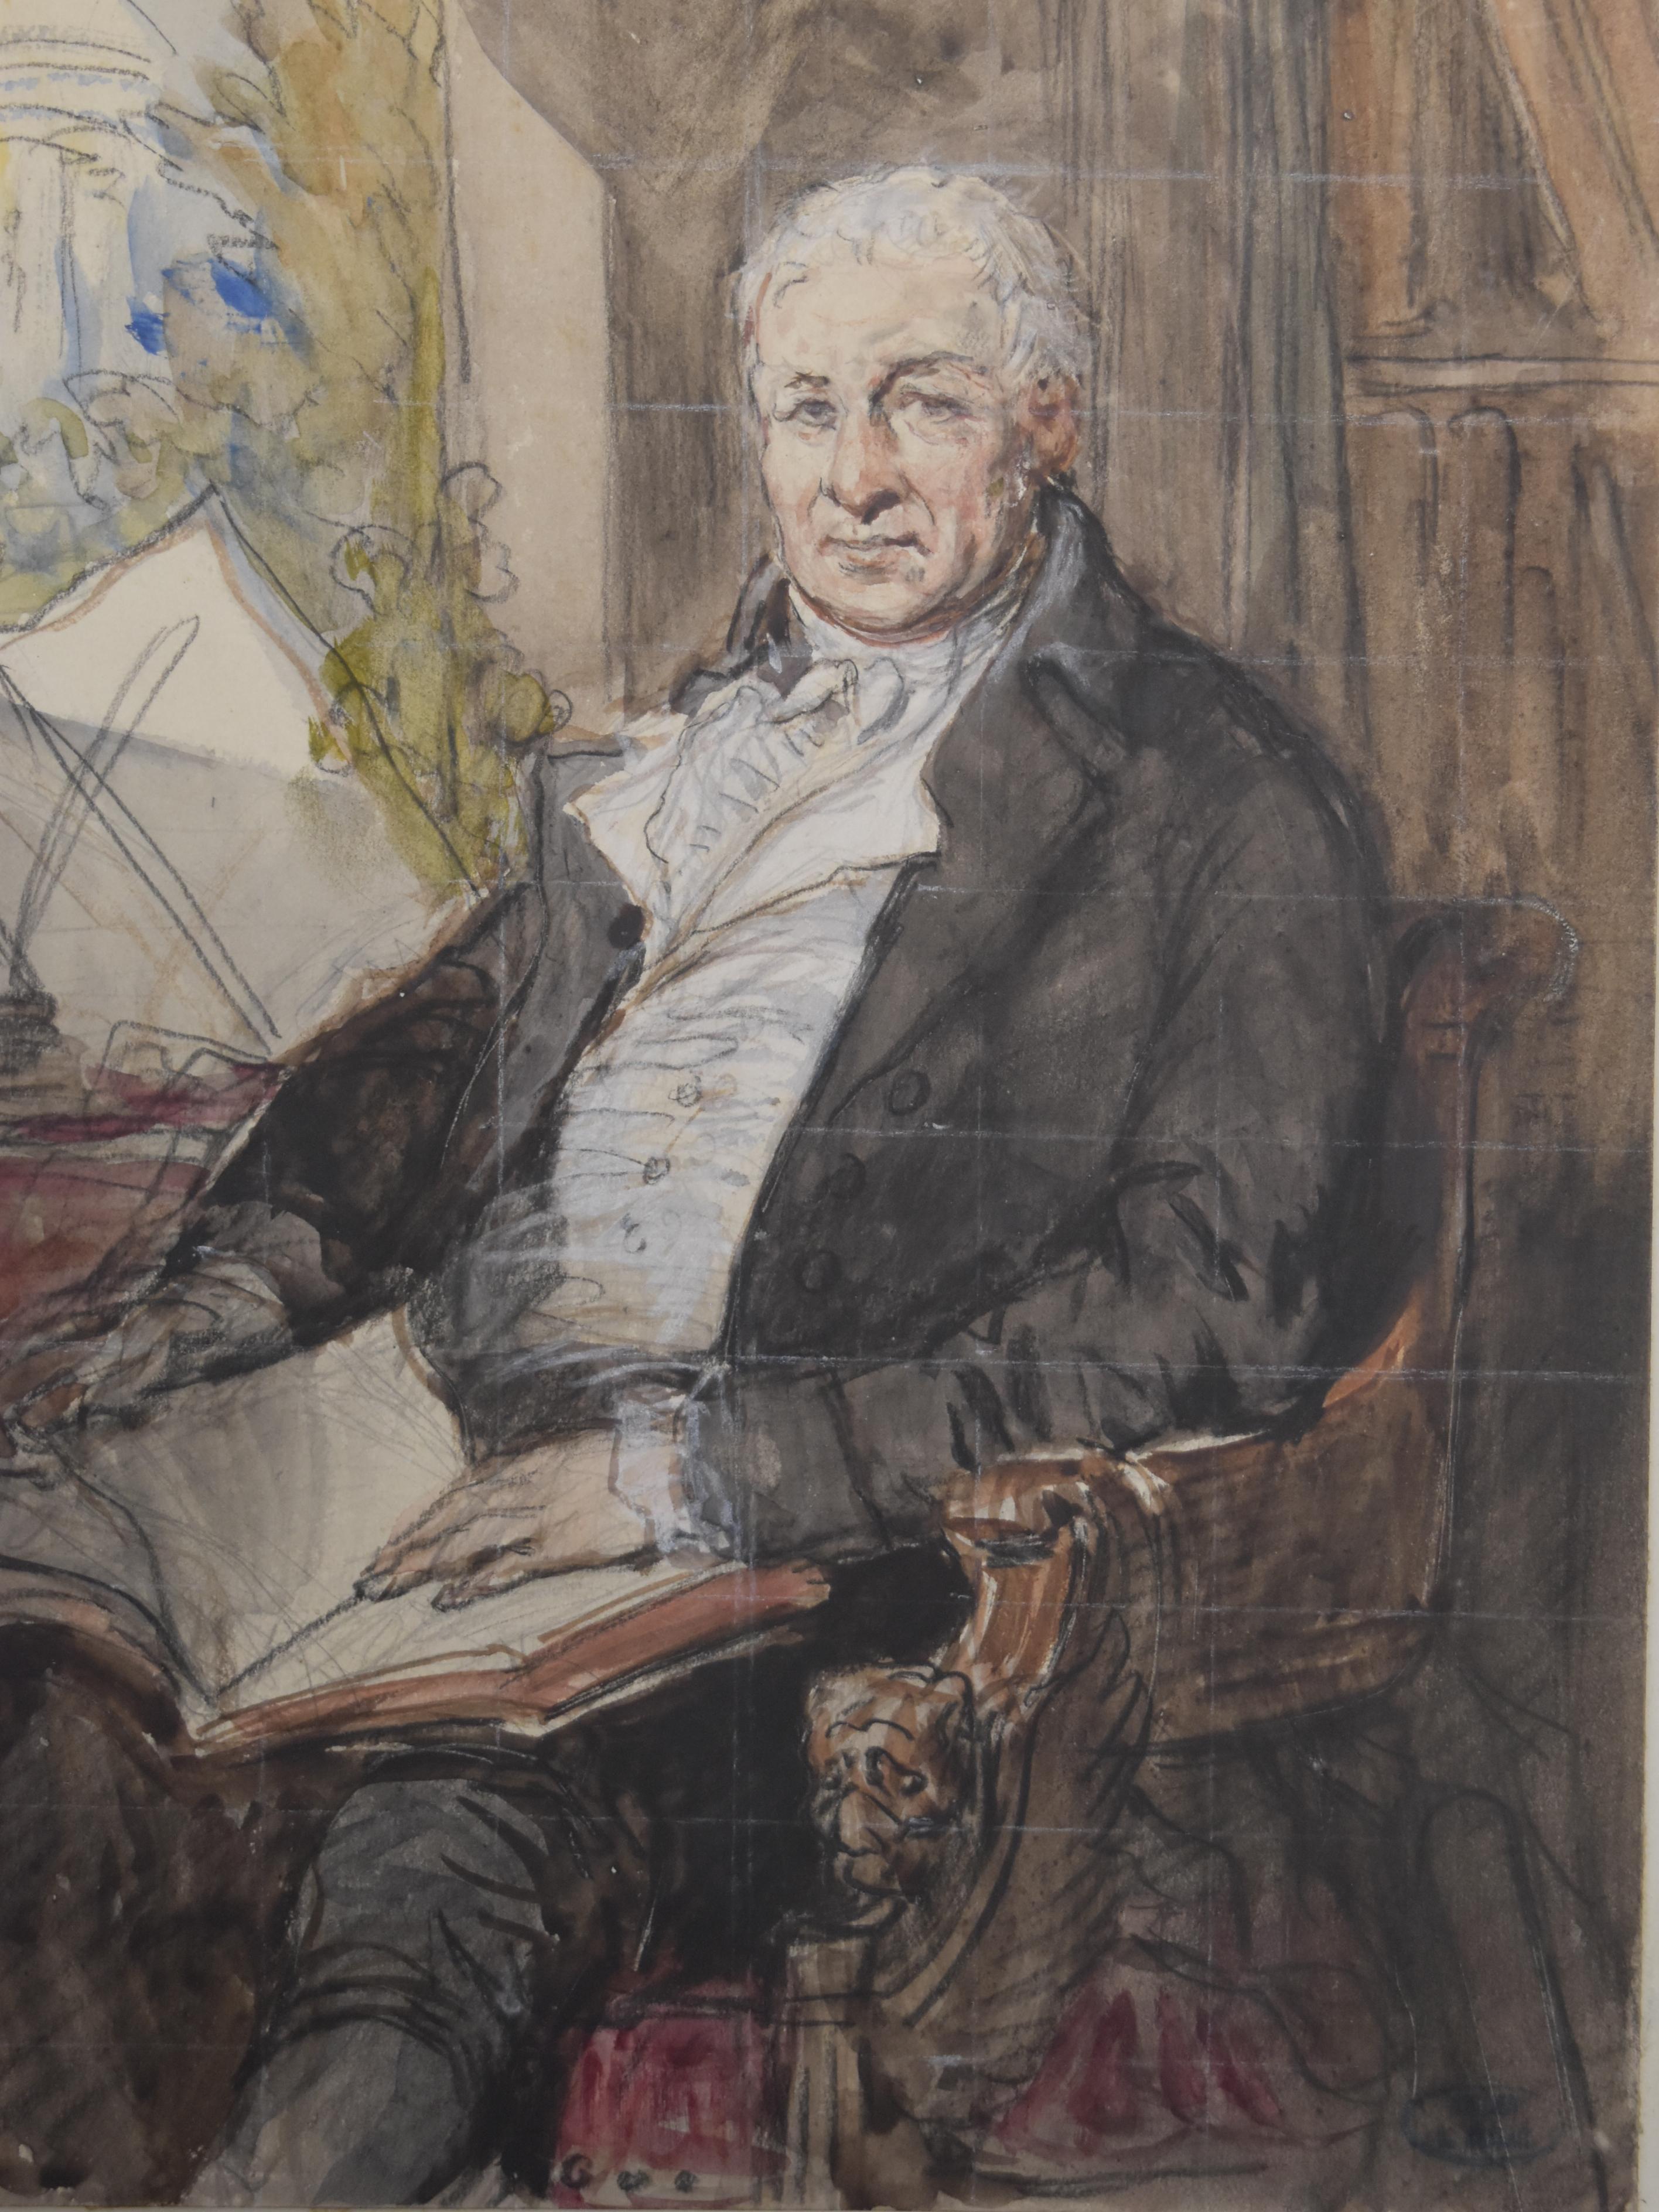 Louis Gallait (1810-1887)
Portrait of a Gentleman, 
Watercolor and gouache on paper, square white lines, 
24 x 16 cm
Stamp of the Louis Gallait Estate on the mount  on the lower right
On a cardboard mount (27 x 21 cm), with an inventory number (dwg